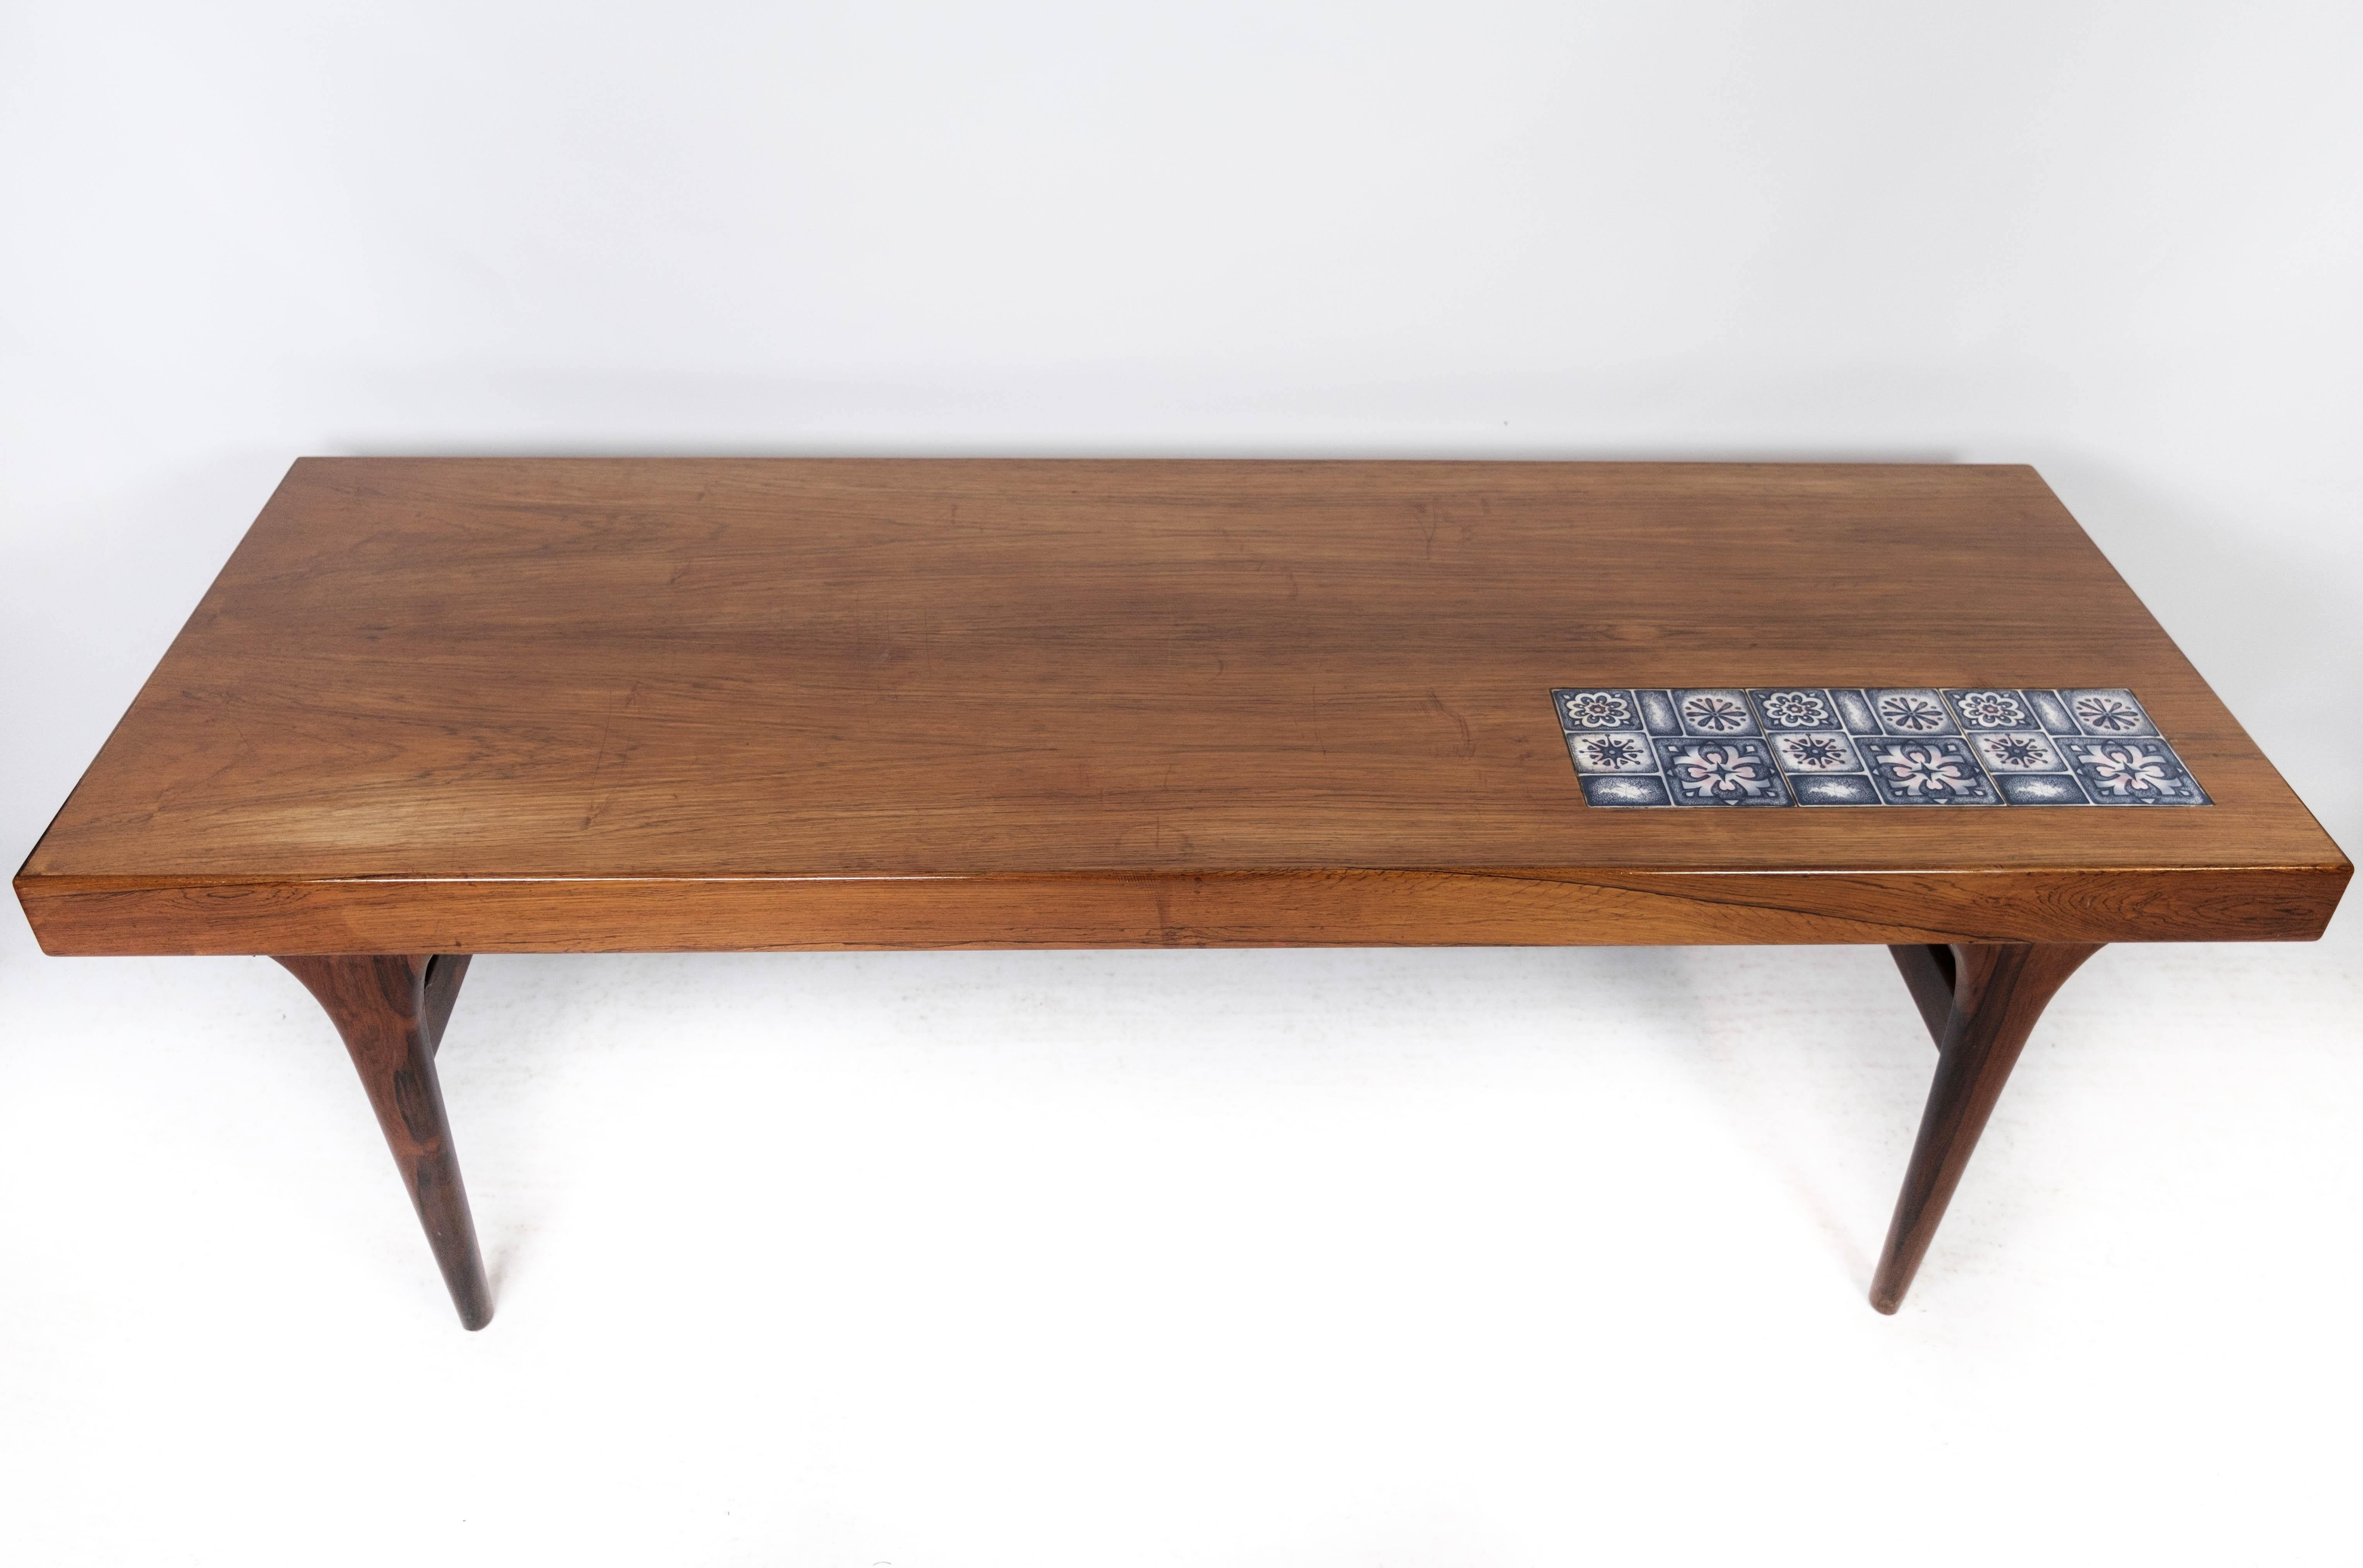 Coffee table in rosewood with blue tiles designed by Johannes Andersen and manufactured by Silkeborg Furniture in the 1960s. The table is in great vintage condition.